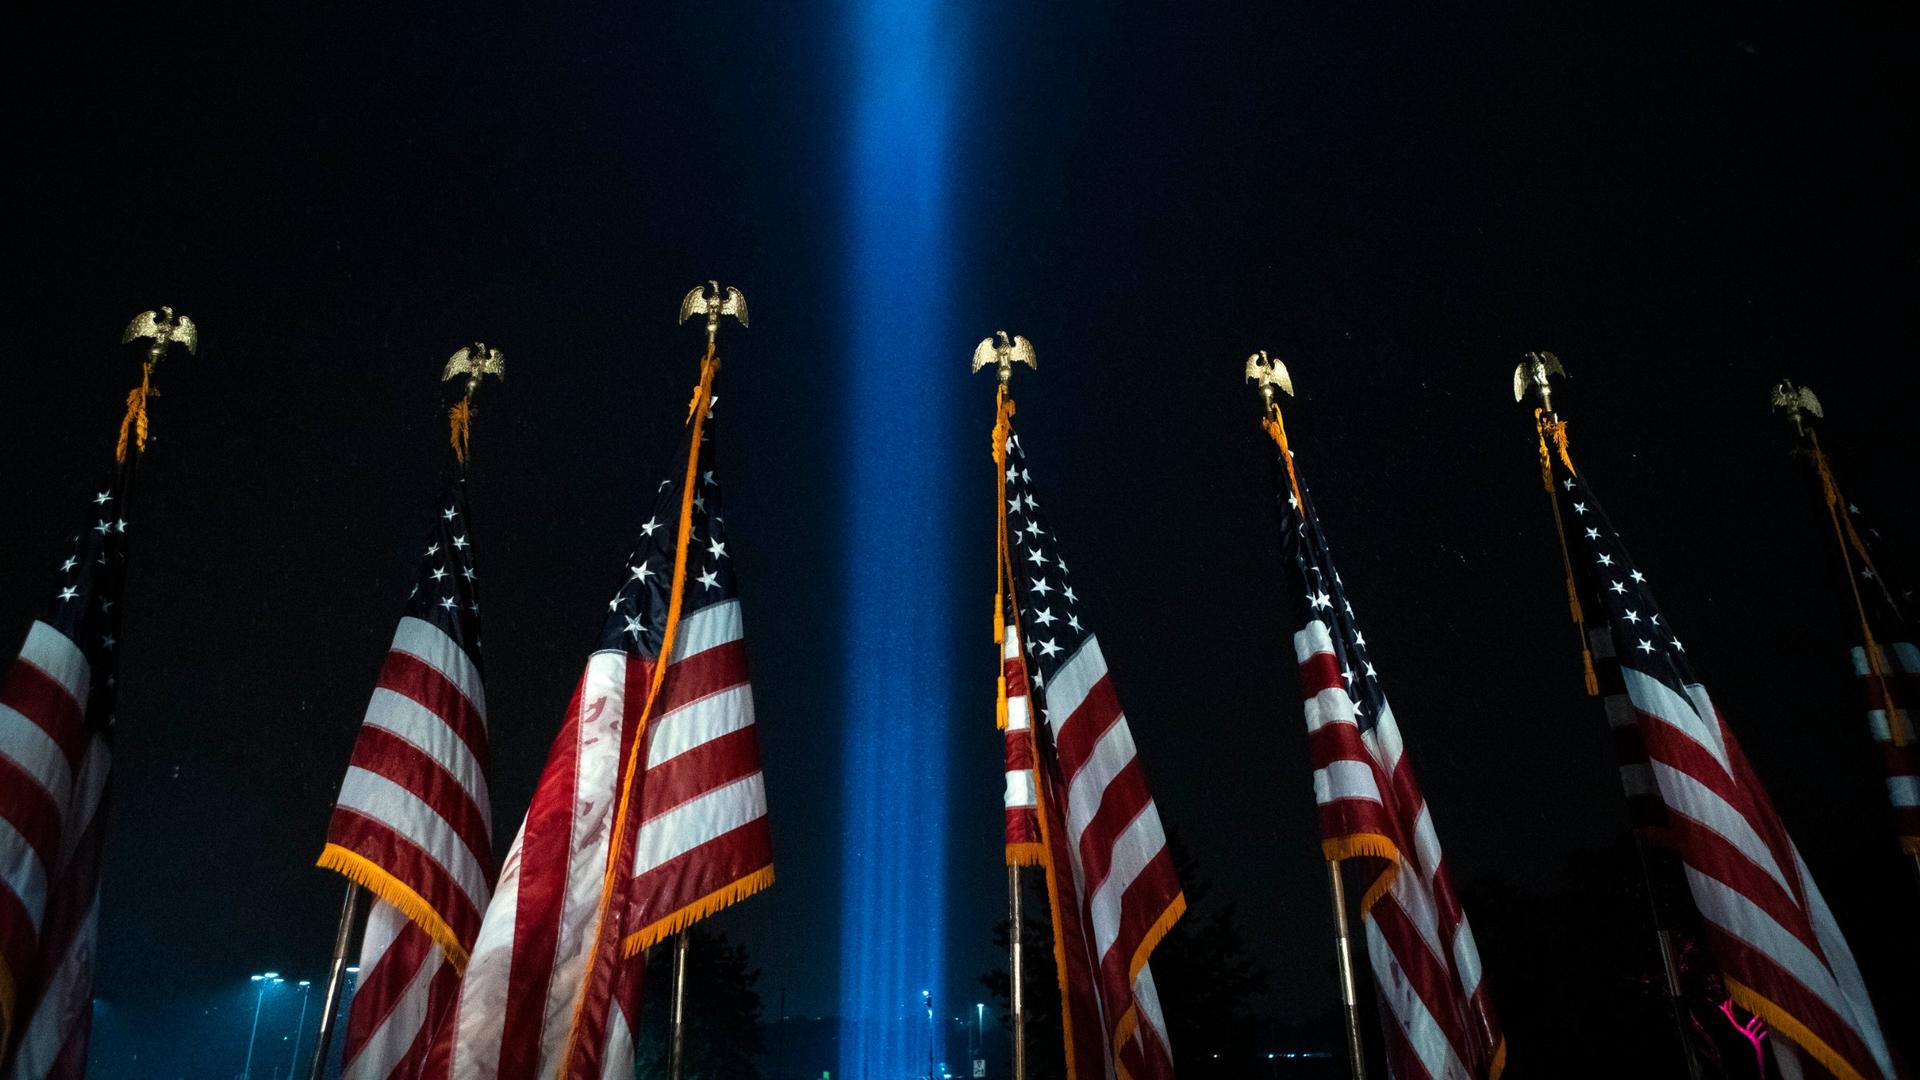 Beams of light are seen over American flags at the Pentagon, as part of a tribute marking the 19th anniversary of the 9/11 attack on the Pentagon, Sept. 9, 2020, in Washington, DC.